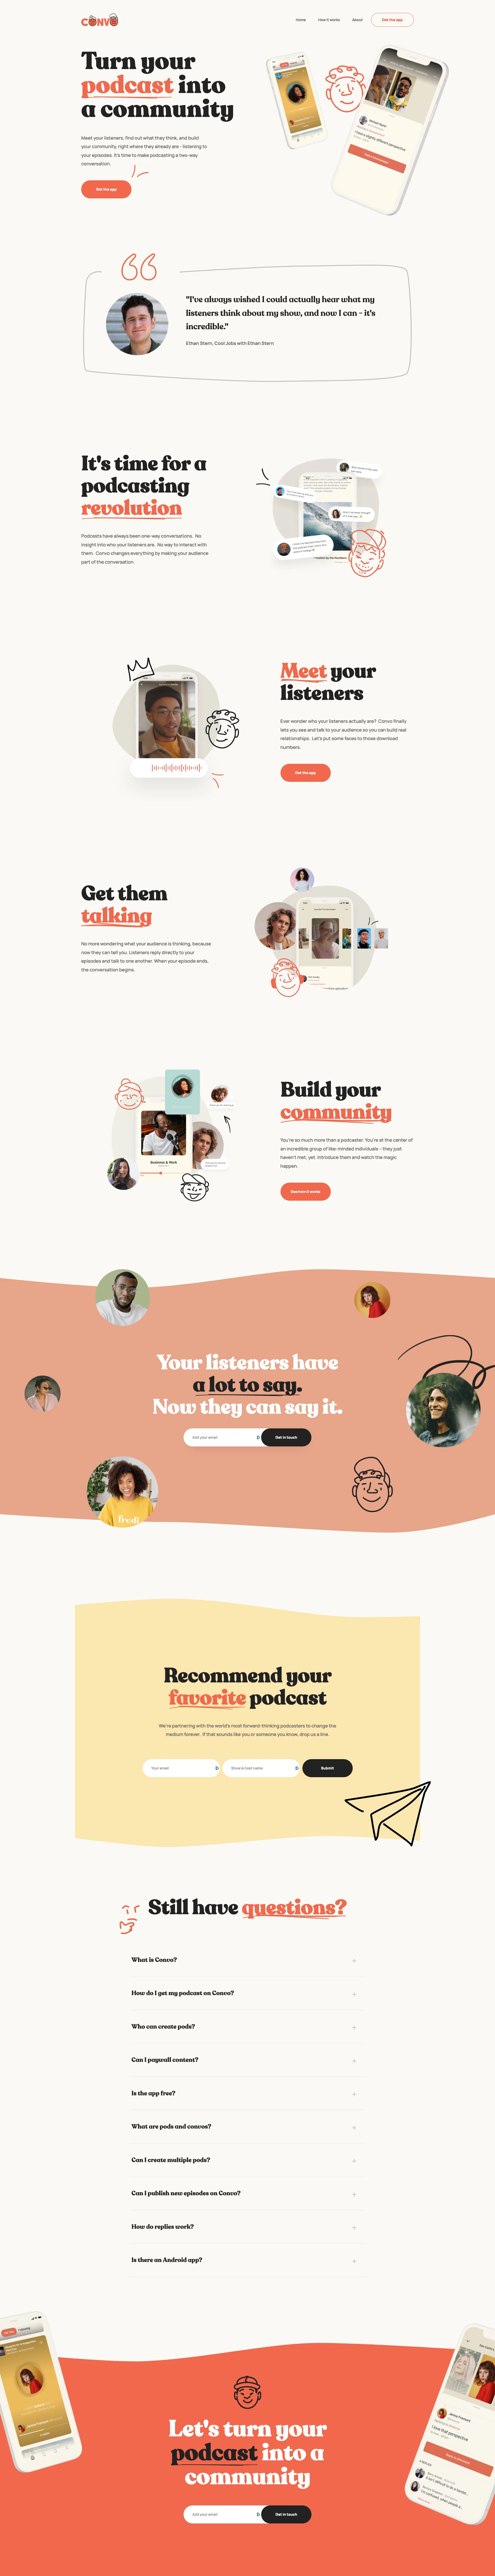 Convo Landing Page Example: Turn your podcast into a community. Meet your listeners, find out what they think, and build your community, right where they already are - listening to your episodes. It's time to make podcasting a two-way conversation.